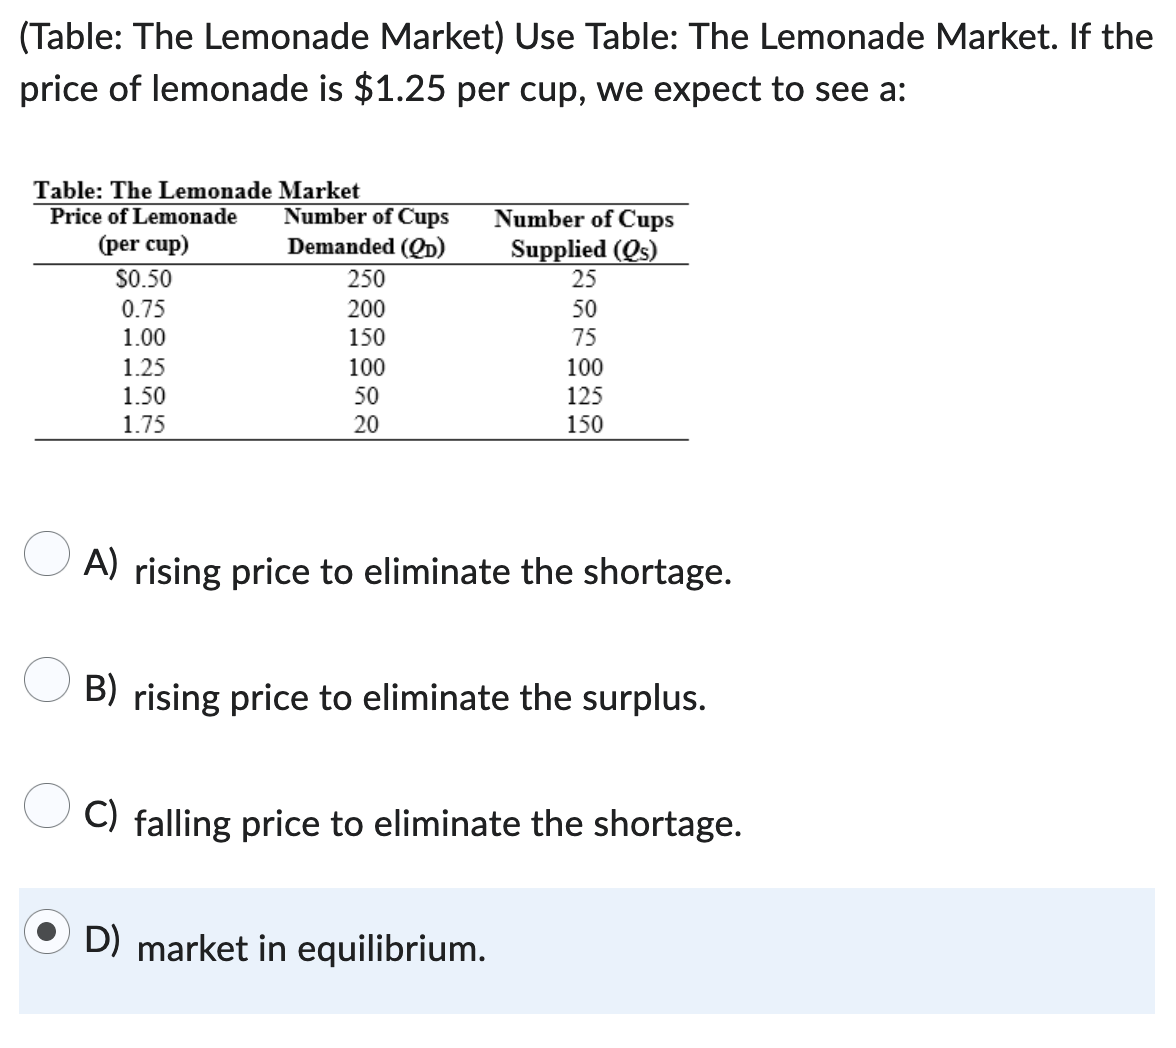 (Table: The Lemonade Market) Use Table: The Lemonade Market. If the
price of lemonade is $1.25 per cup, we expect to see a:
Table: The Lemonade Market
Price of Lemonade
(per cup)
$0.50
0.75
1.00
1.25
1.50
1.75
Number of Cups
Demanded (QD)
250
200
150
100
50
20
Number of Cups
Supplied (Qs)
25
50
75
100
125
150
A) rising price to eliminate the shortage.
D) market in equilibrium.
B) rising price to eliminate the surplus.
C) falling price to eliminate the shortage.